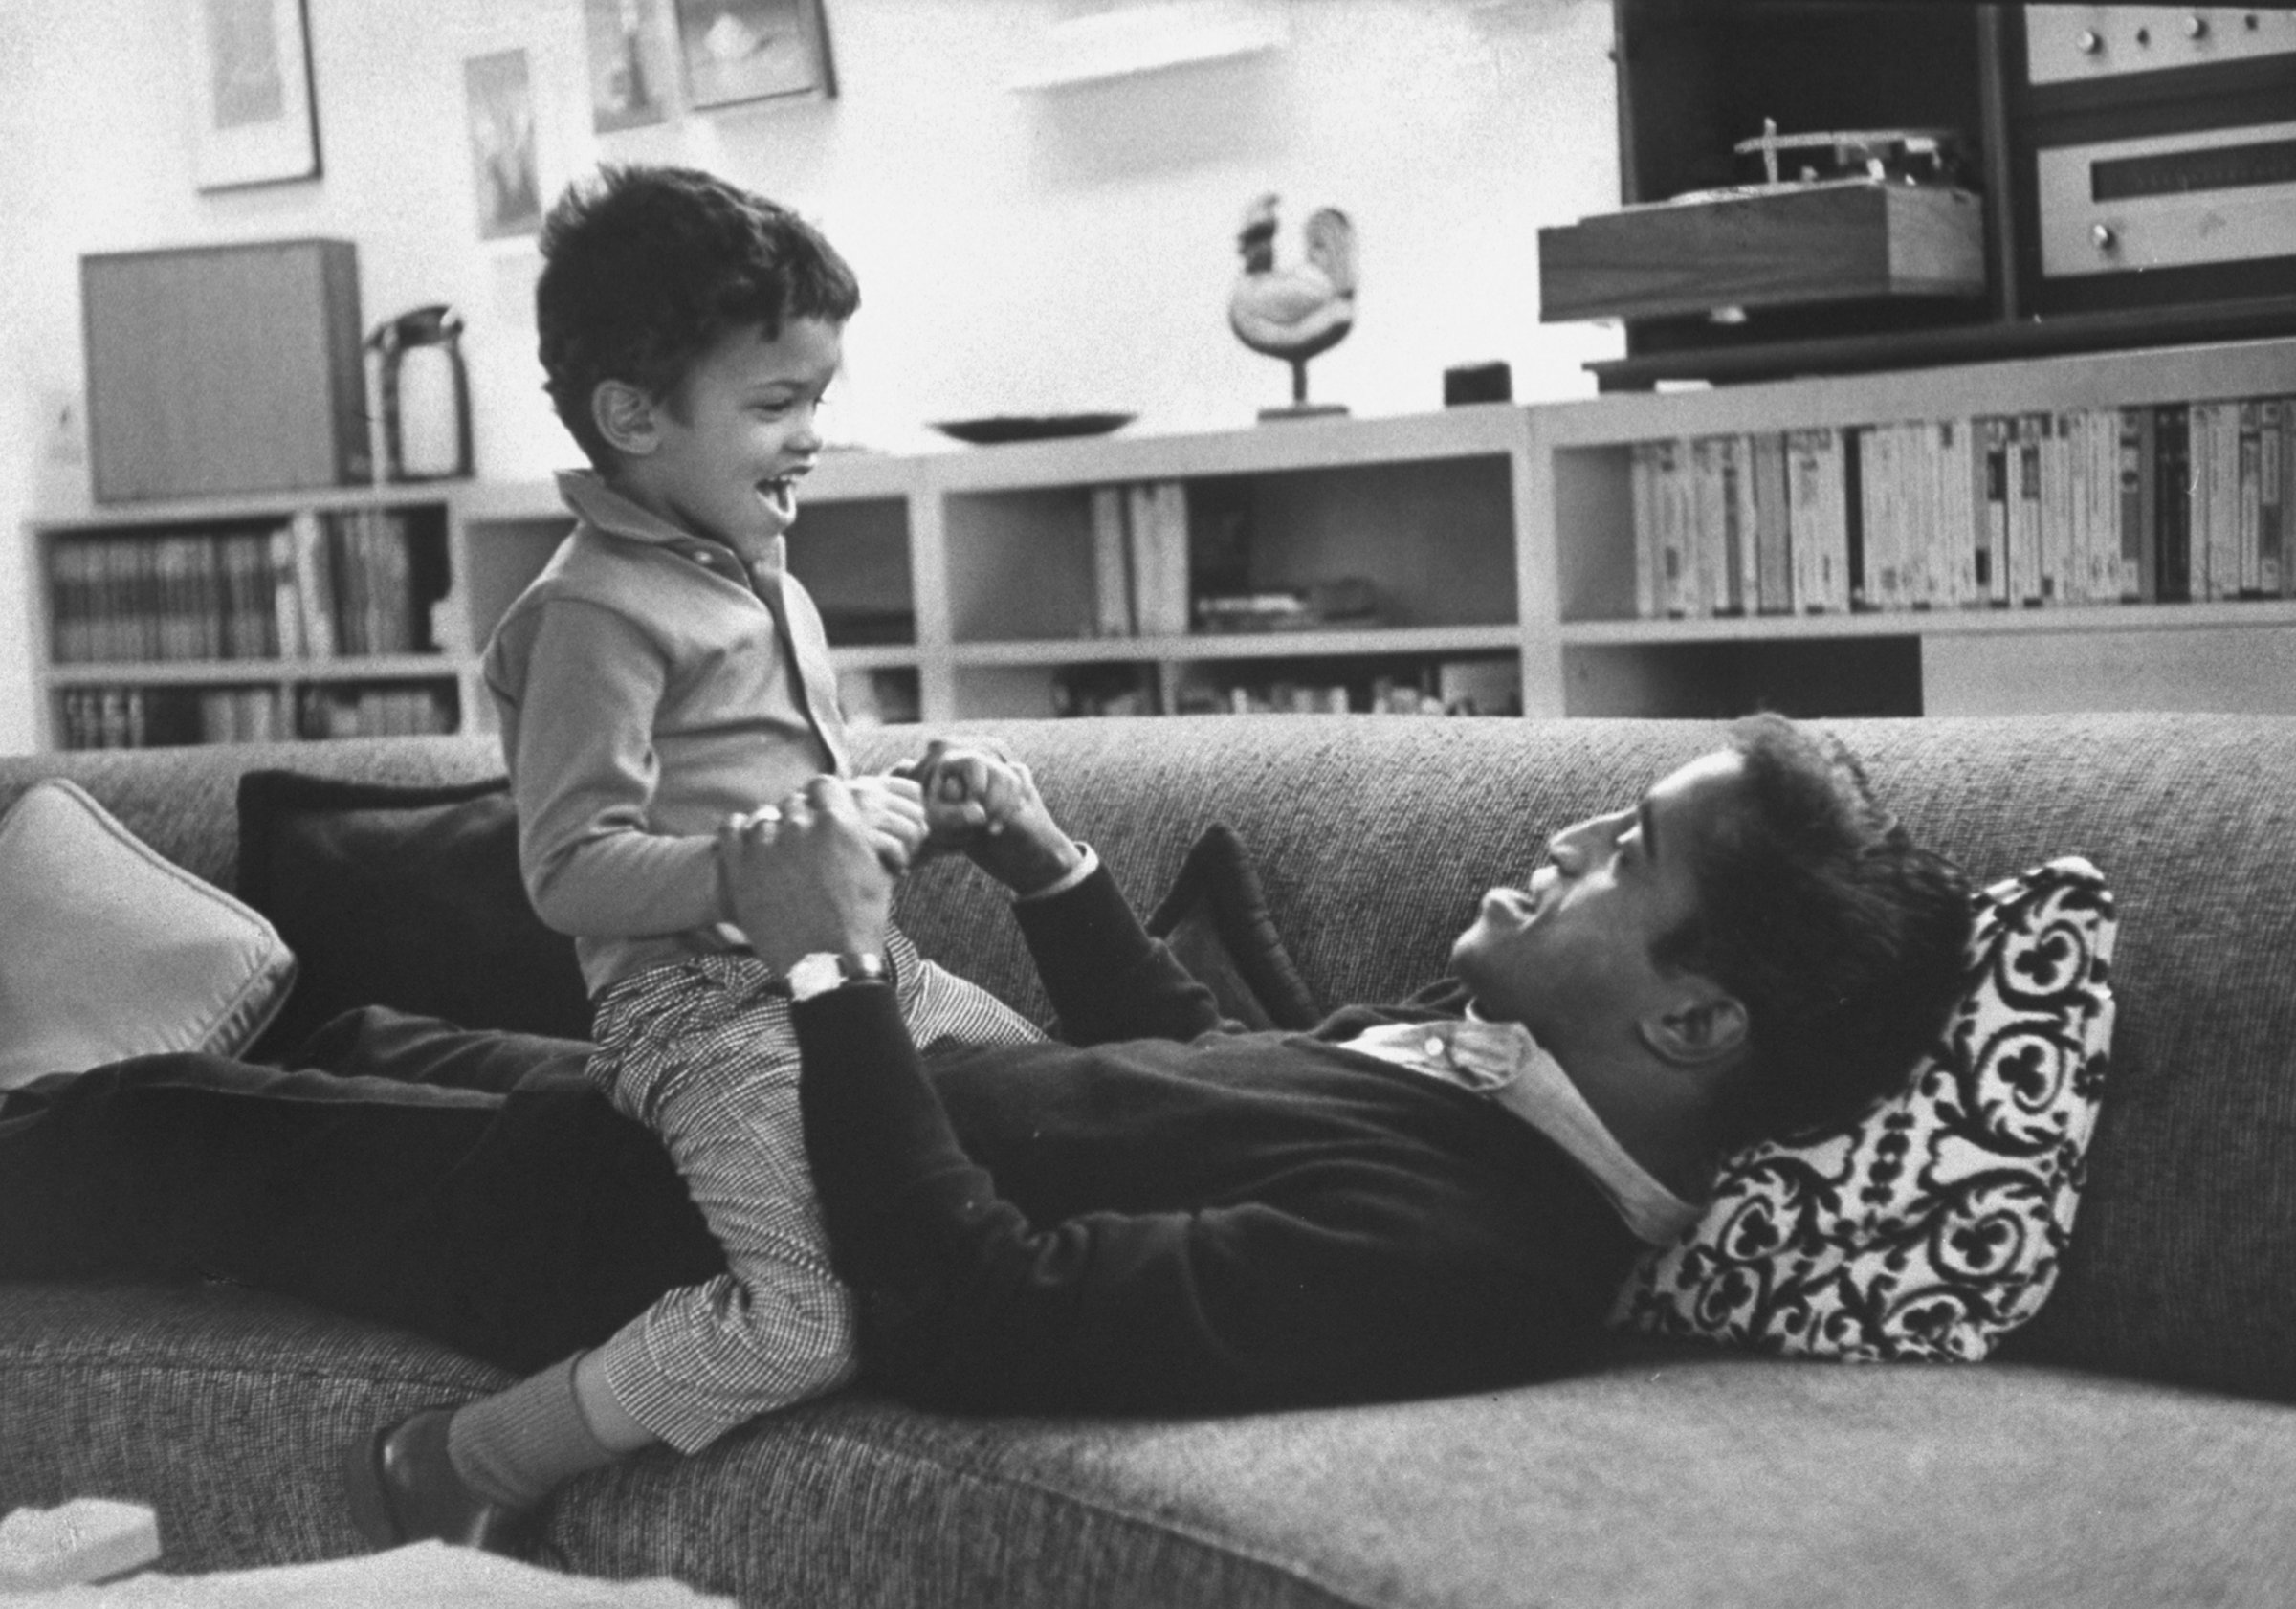 Sammy Davis Jr. Plays With Son on couch in 1964